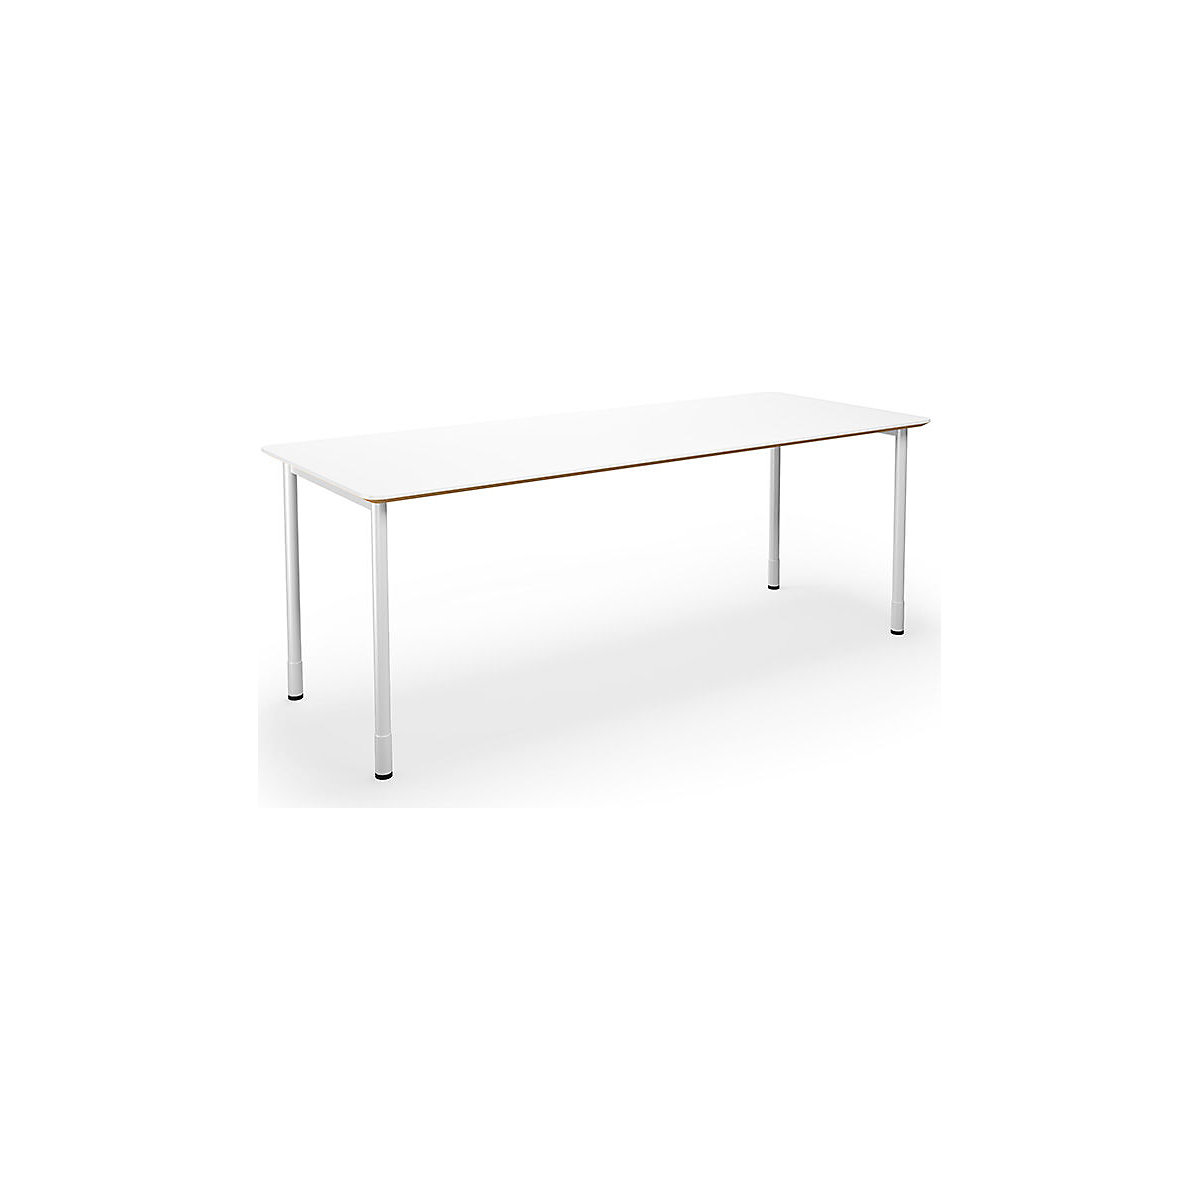 DUO-C Trend multi-purpose desk, straight tabletop, rounded corners, WxD 1800 x 800 mm, white, white-2